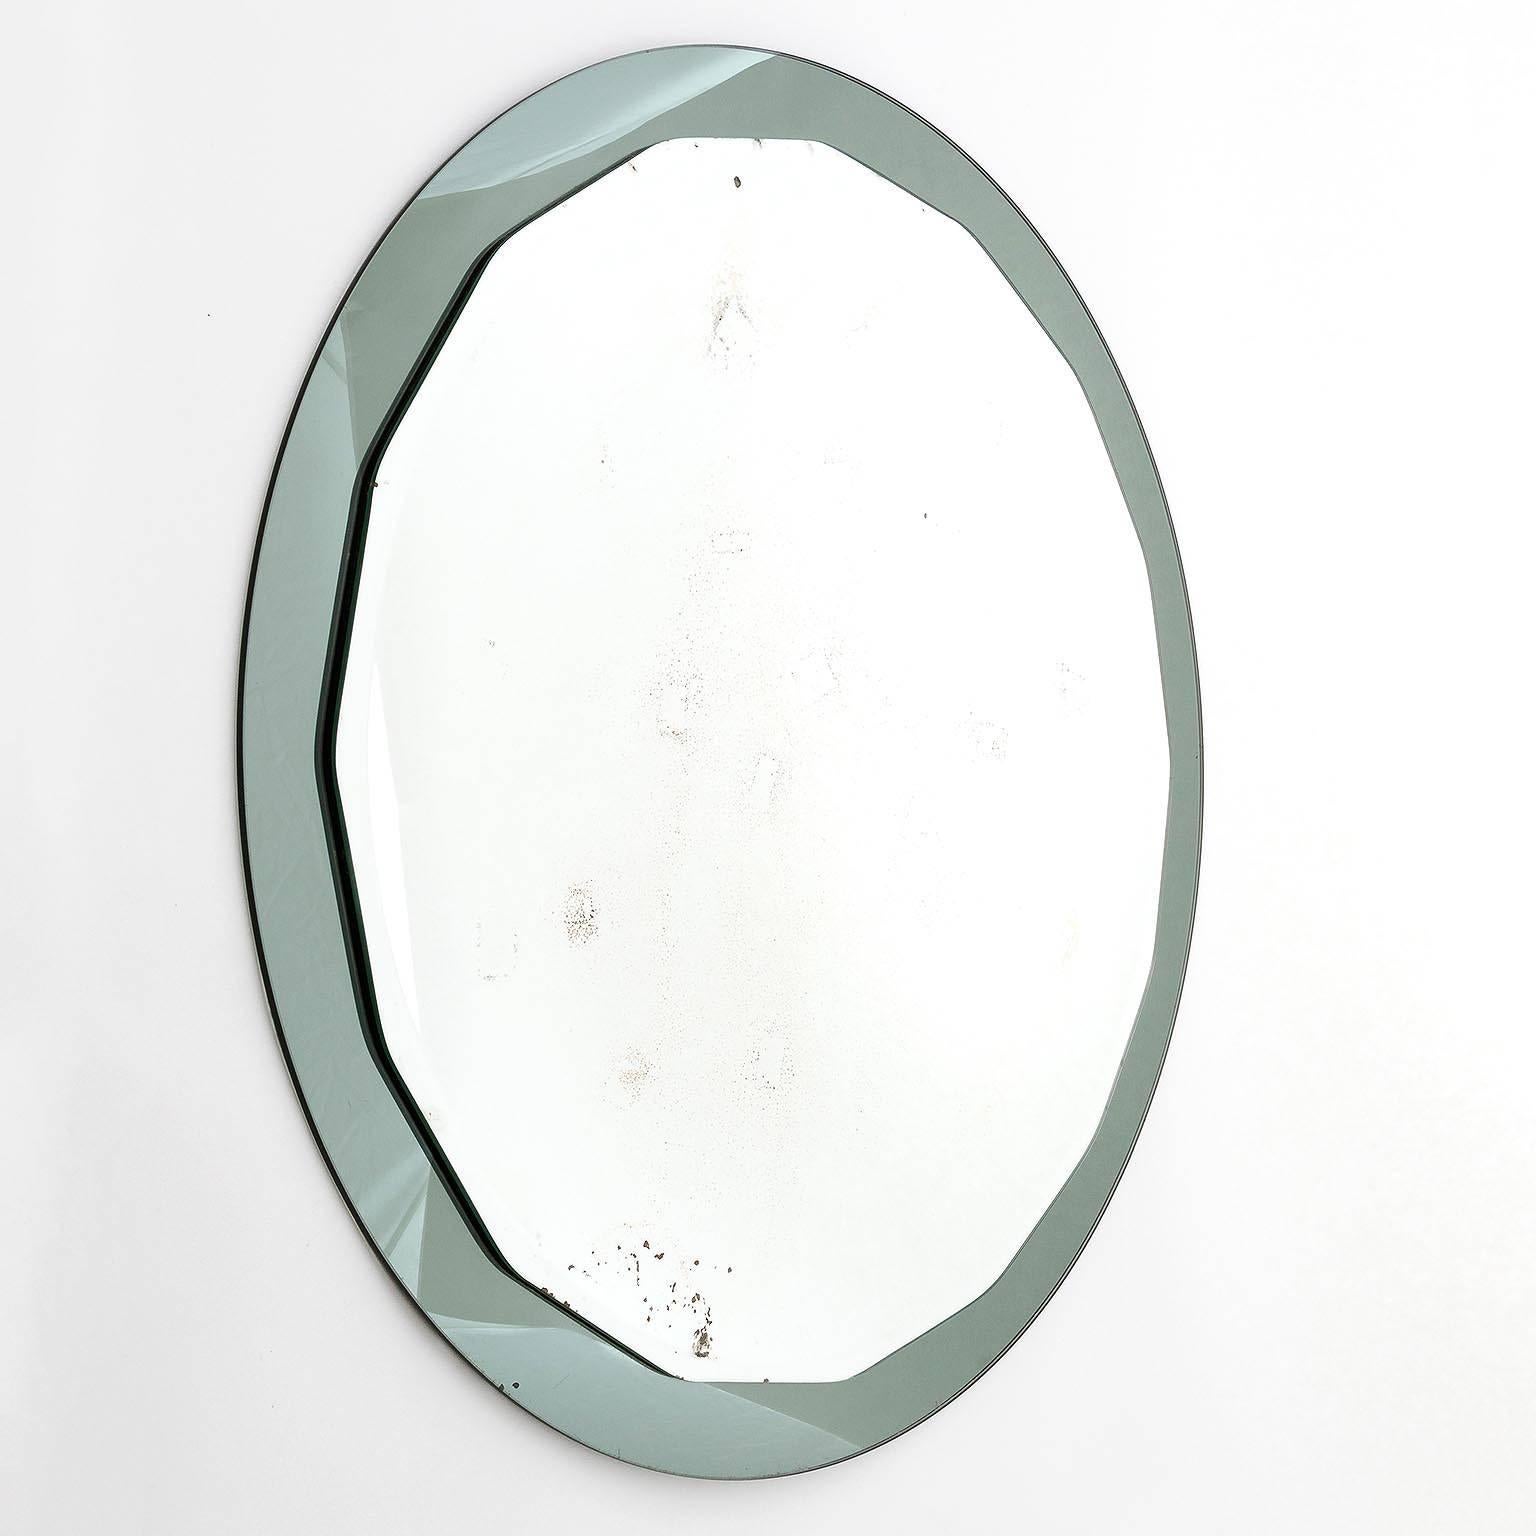 An Italian wall mirror manufactured in Mid-Century in 1960s. It is made of a round, scalloped faceted mirror with a smoked grey mirror backplate glass. Vintage condition with noticeable wear and stains on the surface.